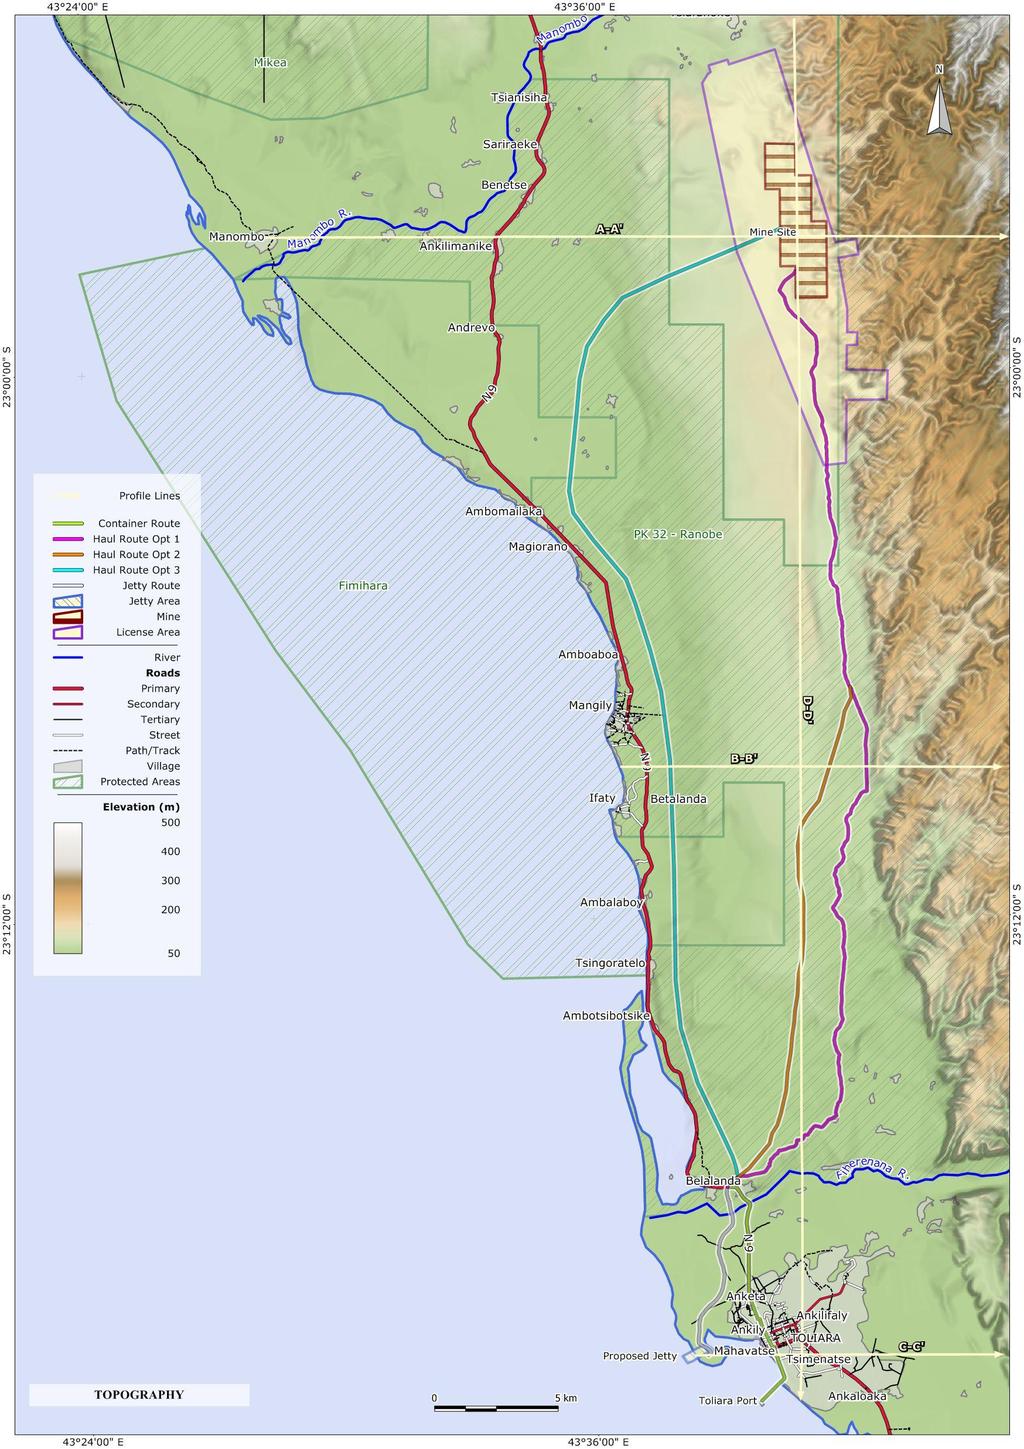 Map 8-1: Topography of the region surrounding the proposed